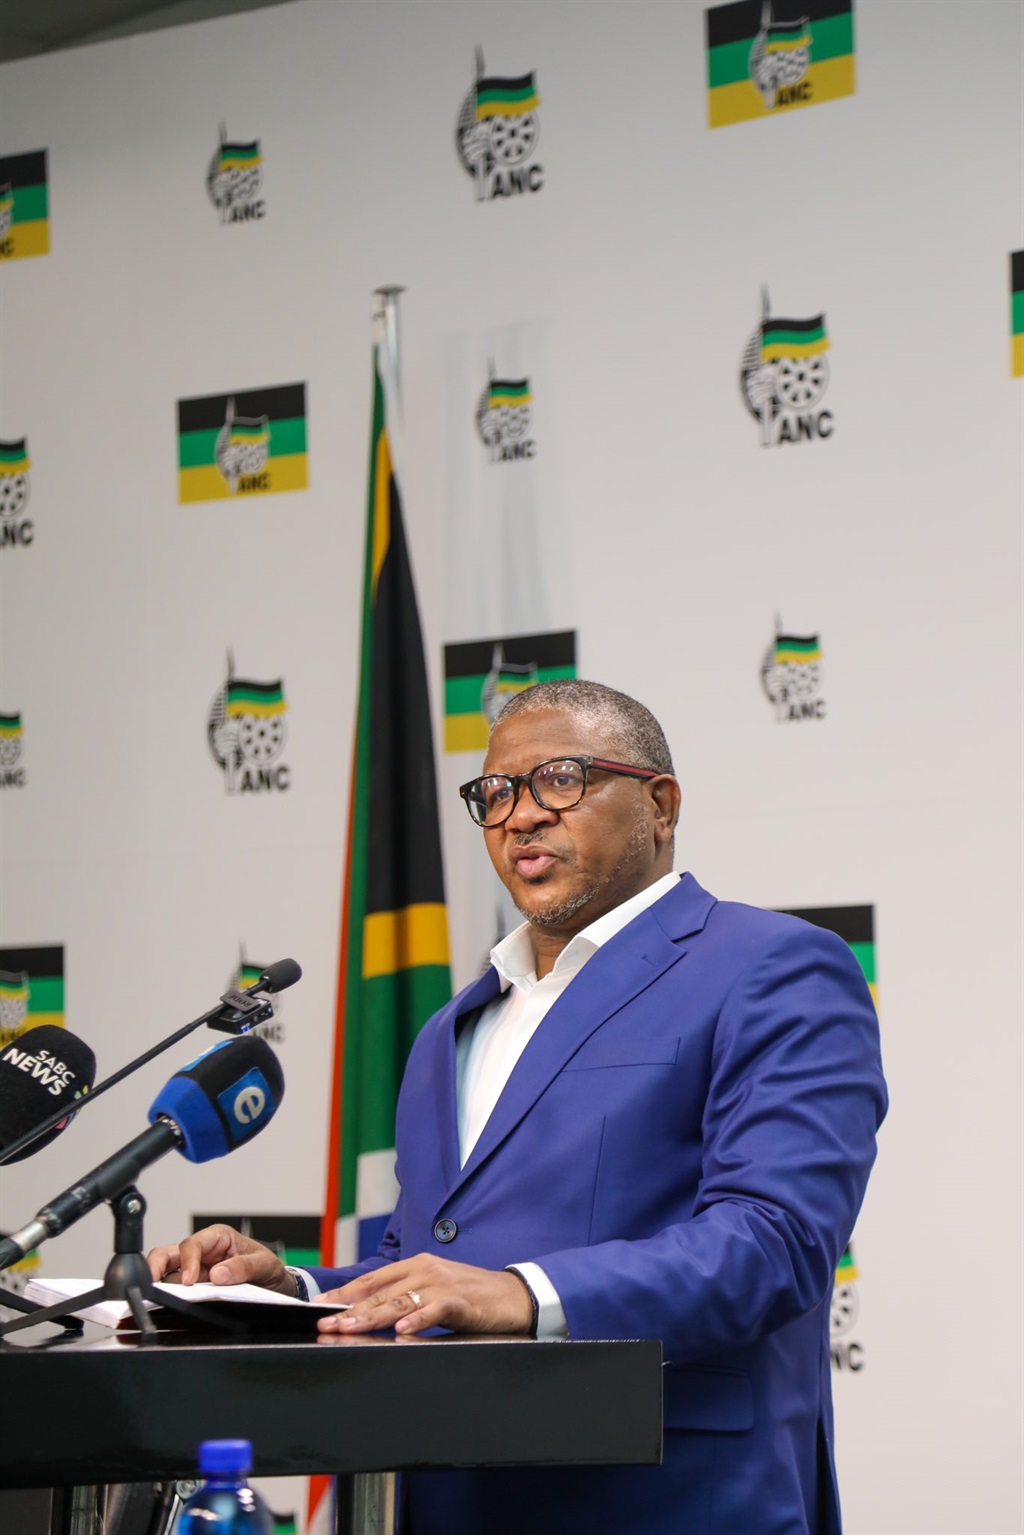 Anc Mps Accused Of Soliciting Bribes Will Face Party Internal Processes Says Mbalula City Press